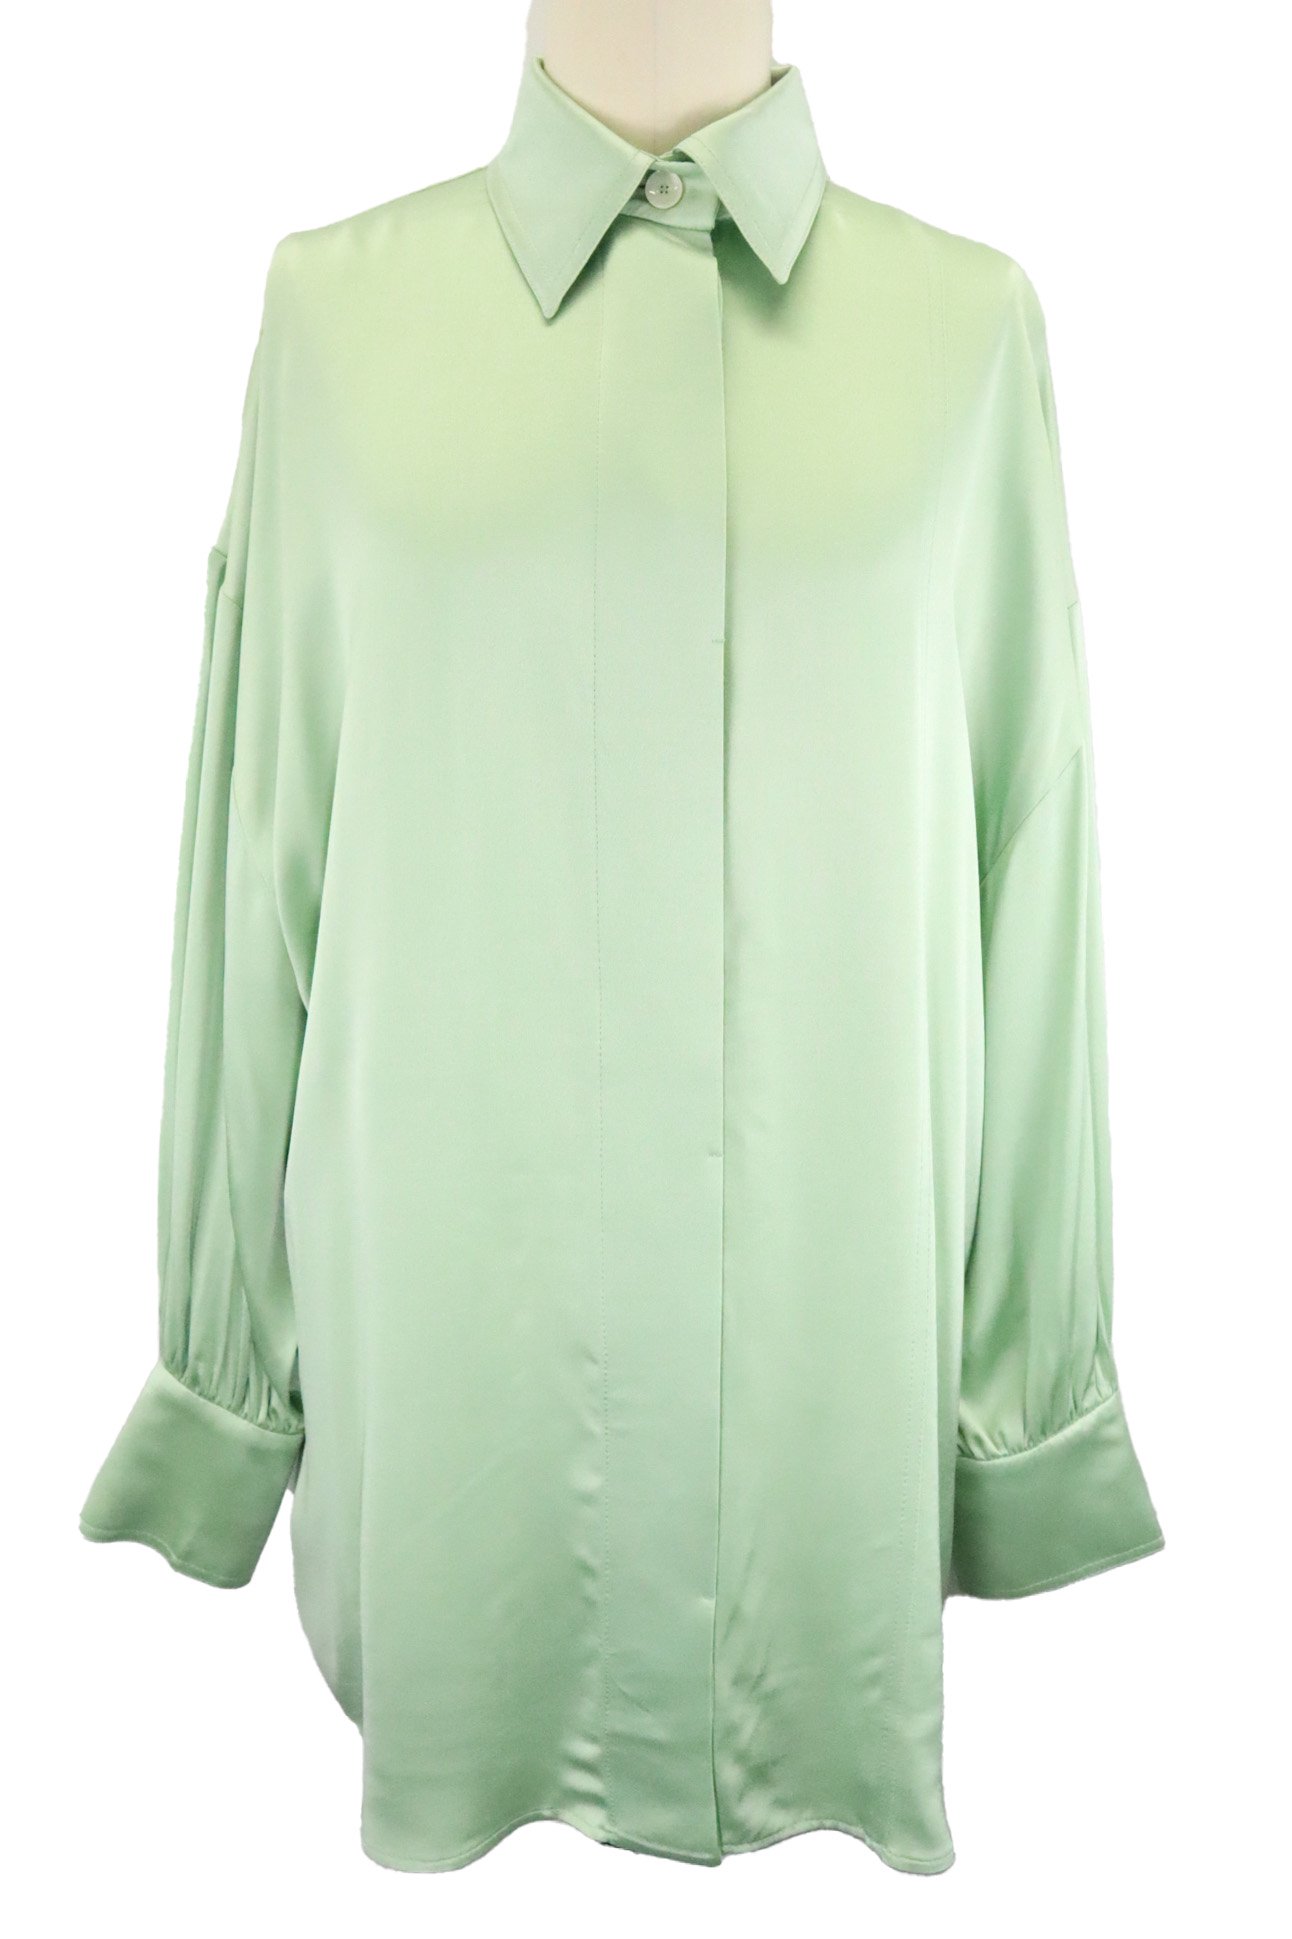 <img class='new_mark_img1' src='https://img.shop-pro.jp/img/new/icons6.gif' style='border:none;display:inline;margin:0px;padding:0px;width:auto;' />AERON RENNNIE shirt (GREEN)